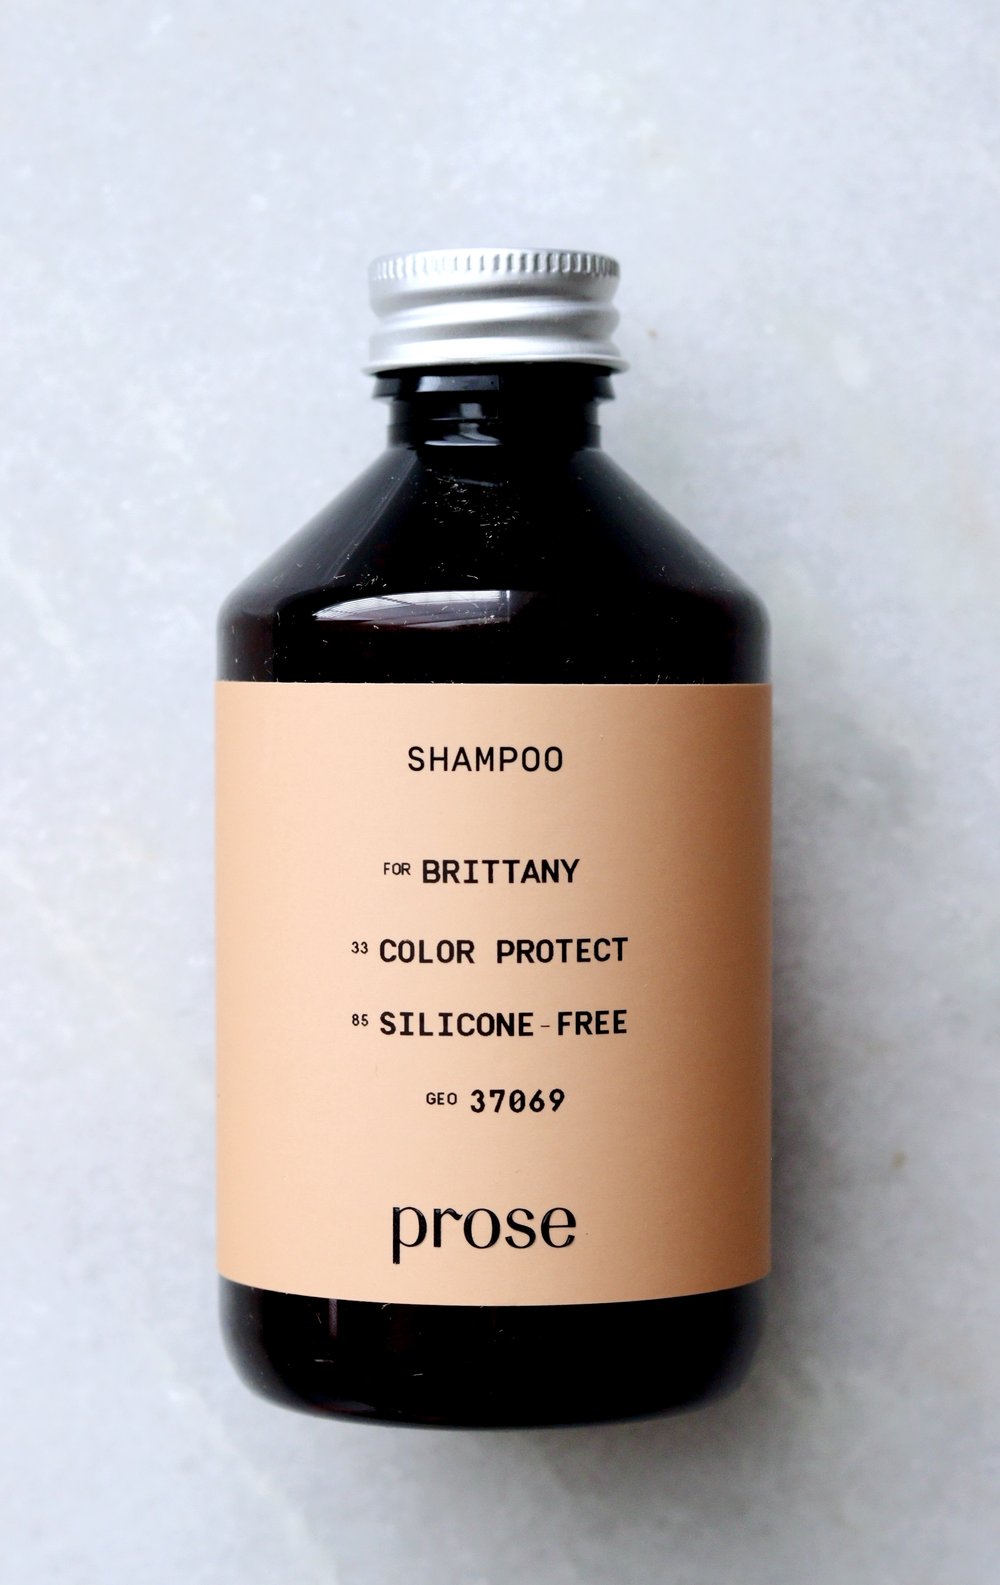 My Honest Review of the Prose Custom Haircare Shampoo and Conditioner, The  StyleShaker™ Scorecard | Clean Beauty & Skincare Guide — The StyleShaker -  A Guide to Clean Beauty, Skincare & More.